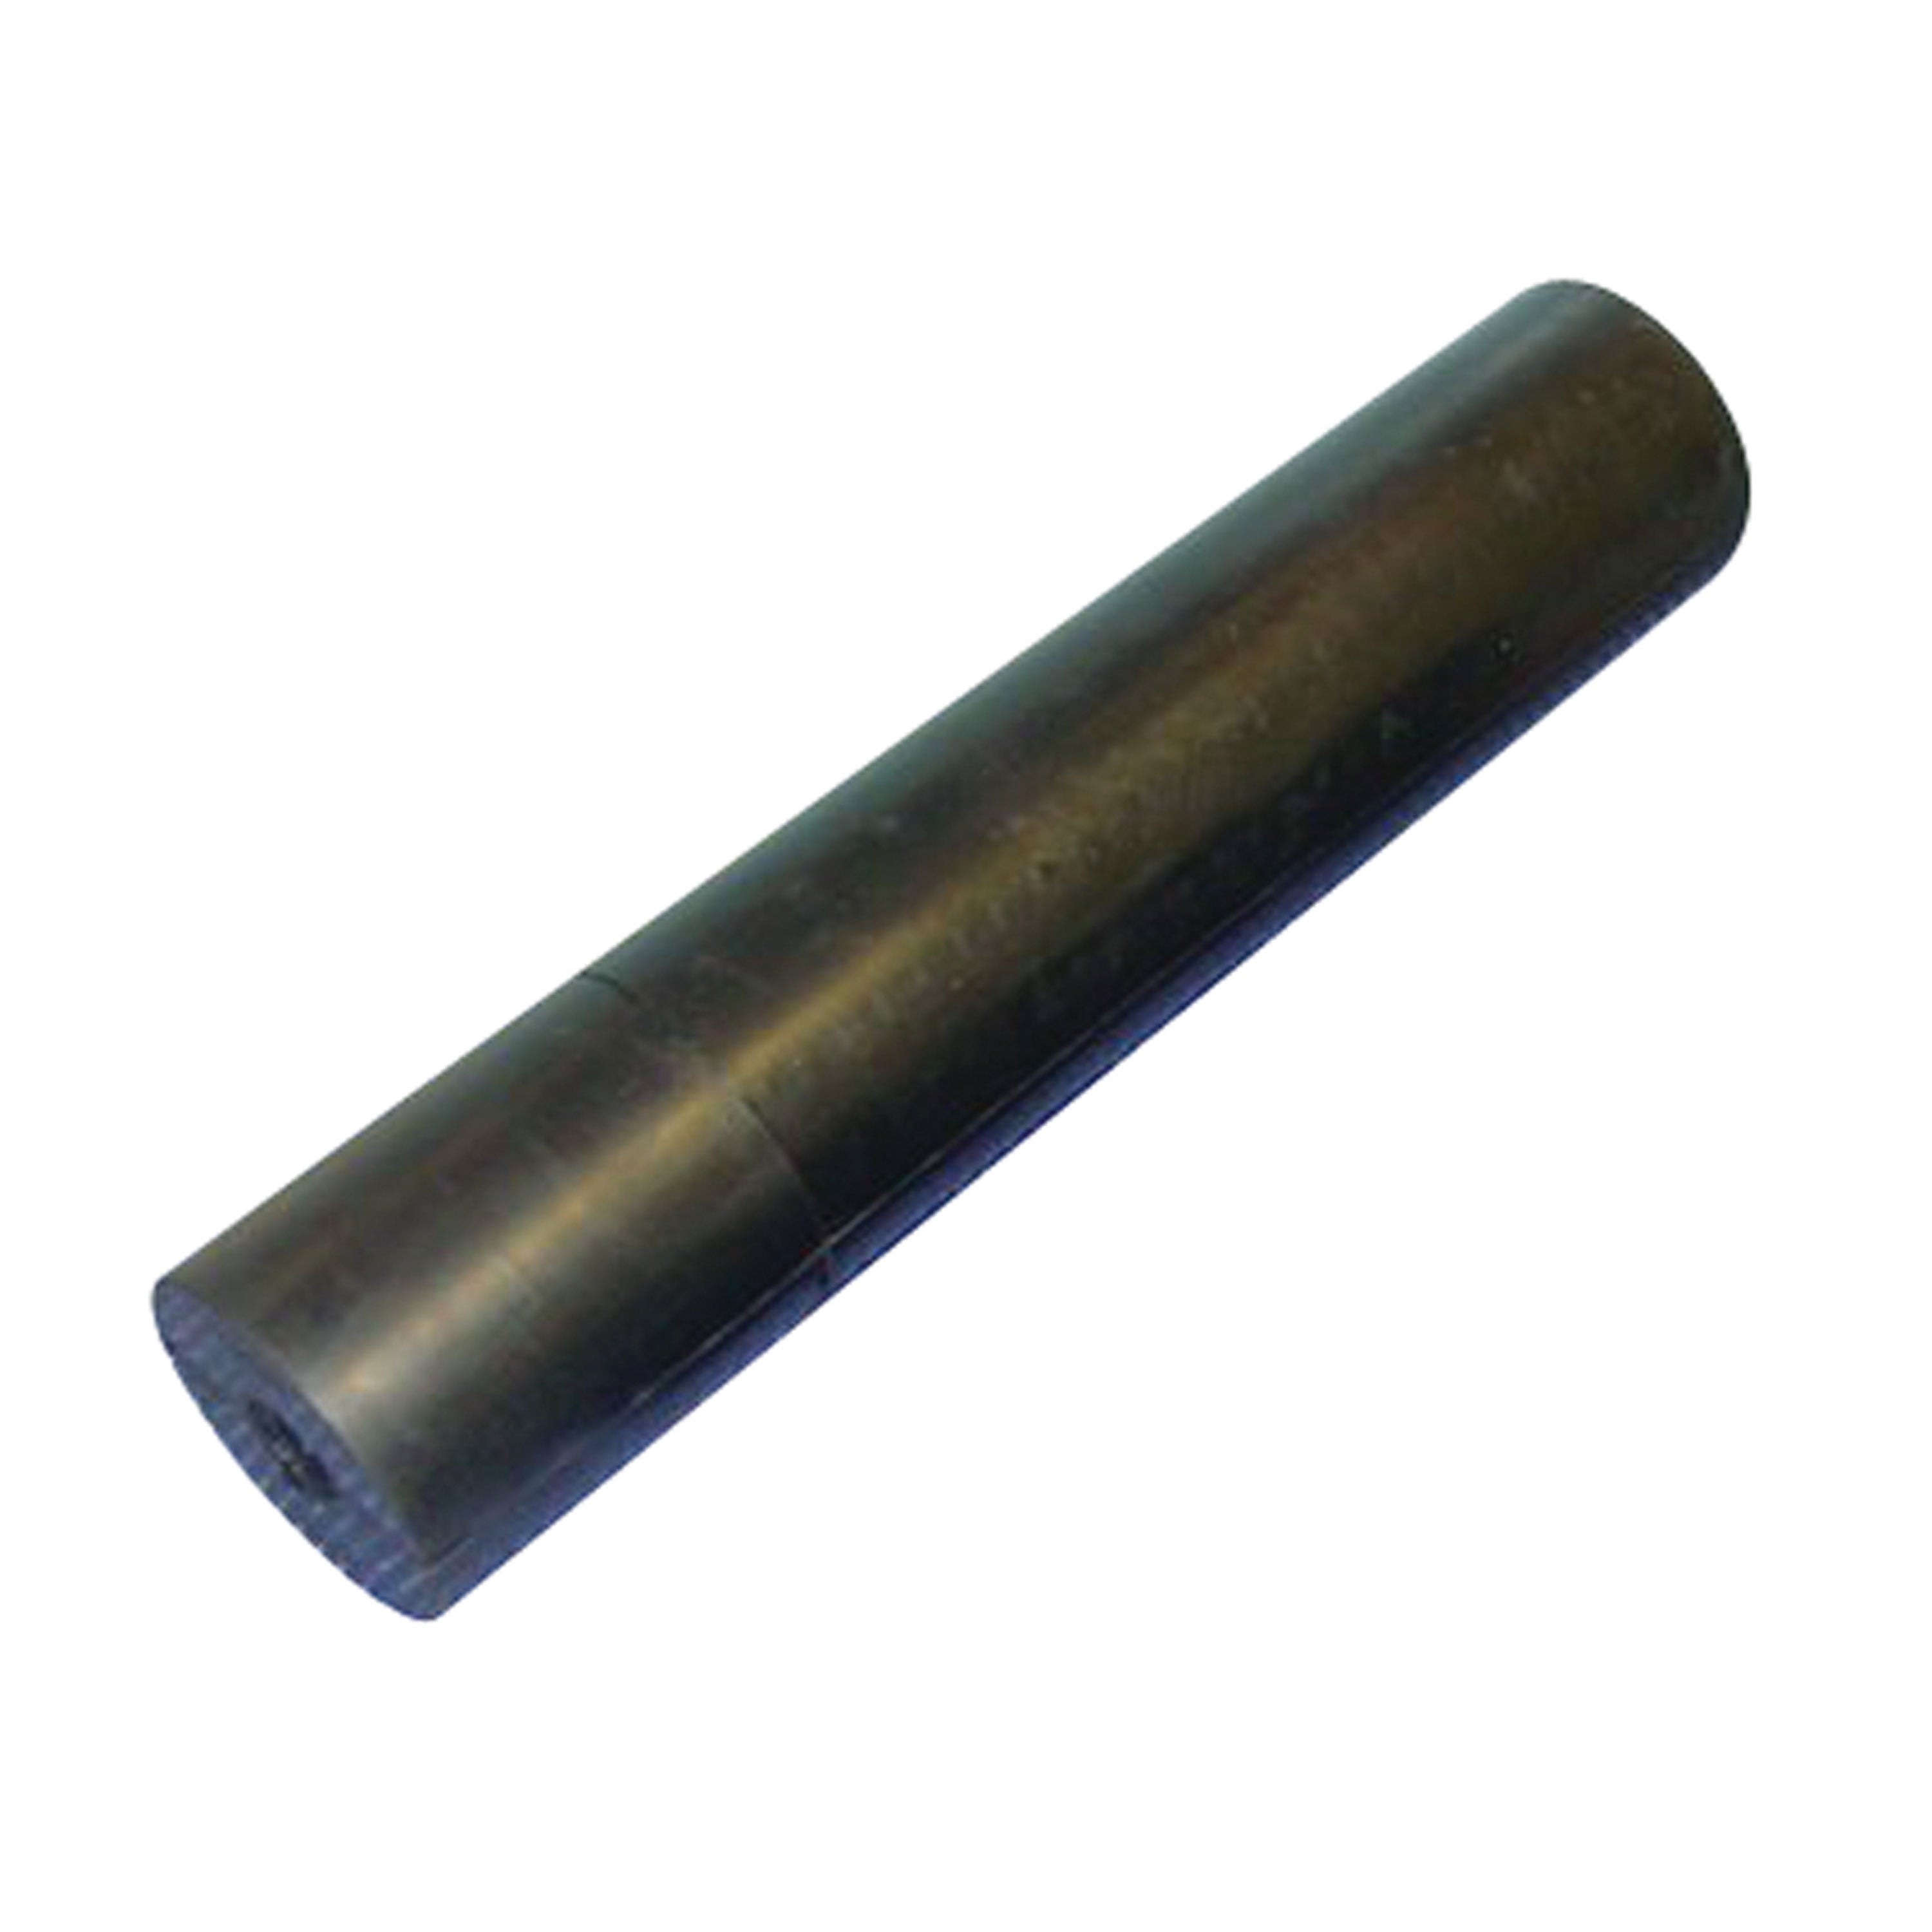 C.H. Yates 9202-4 Black Rubber Molded Straight Side Guide Roller - 2 in. x 9 in. x 0.5 in.